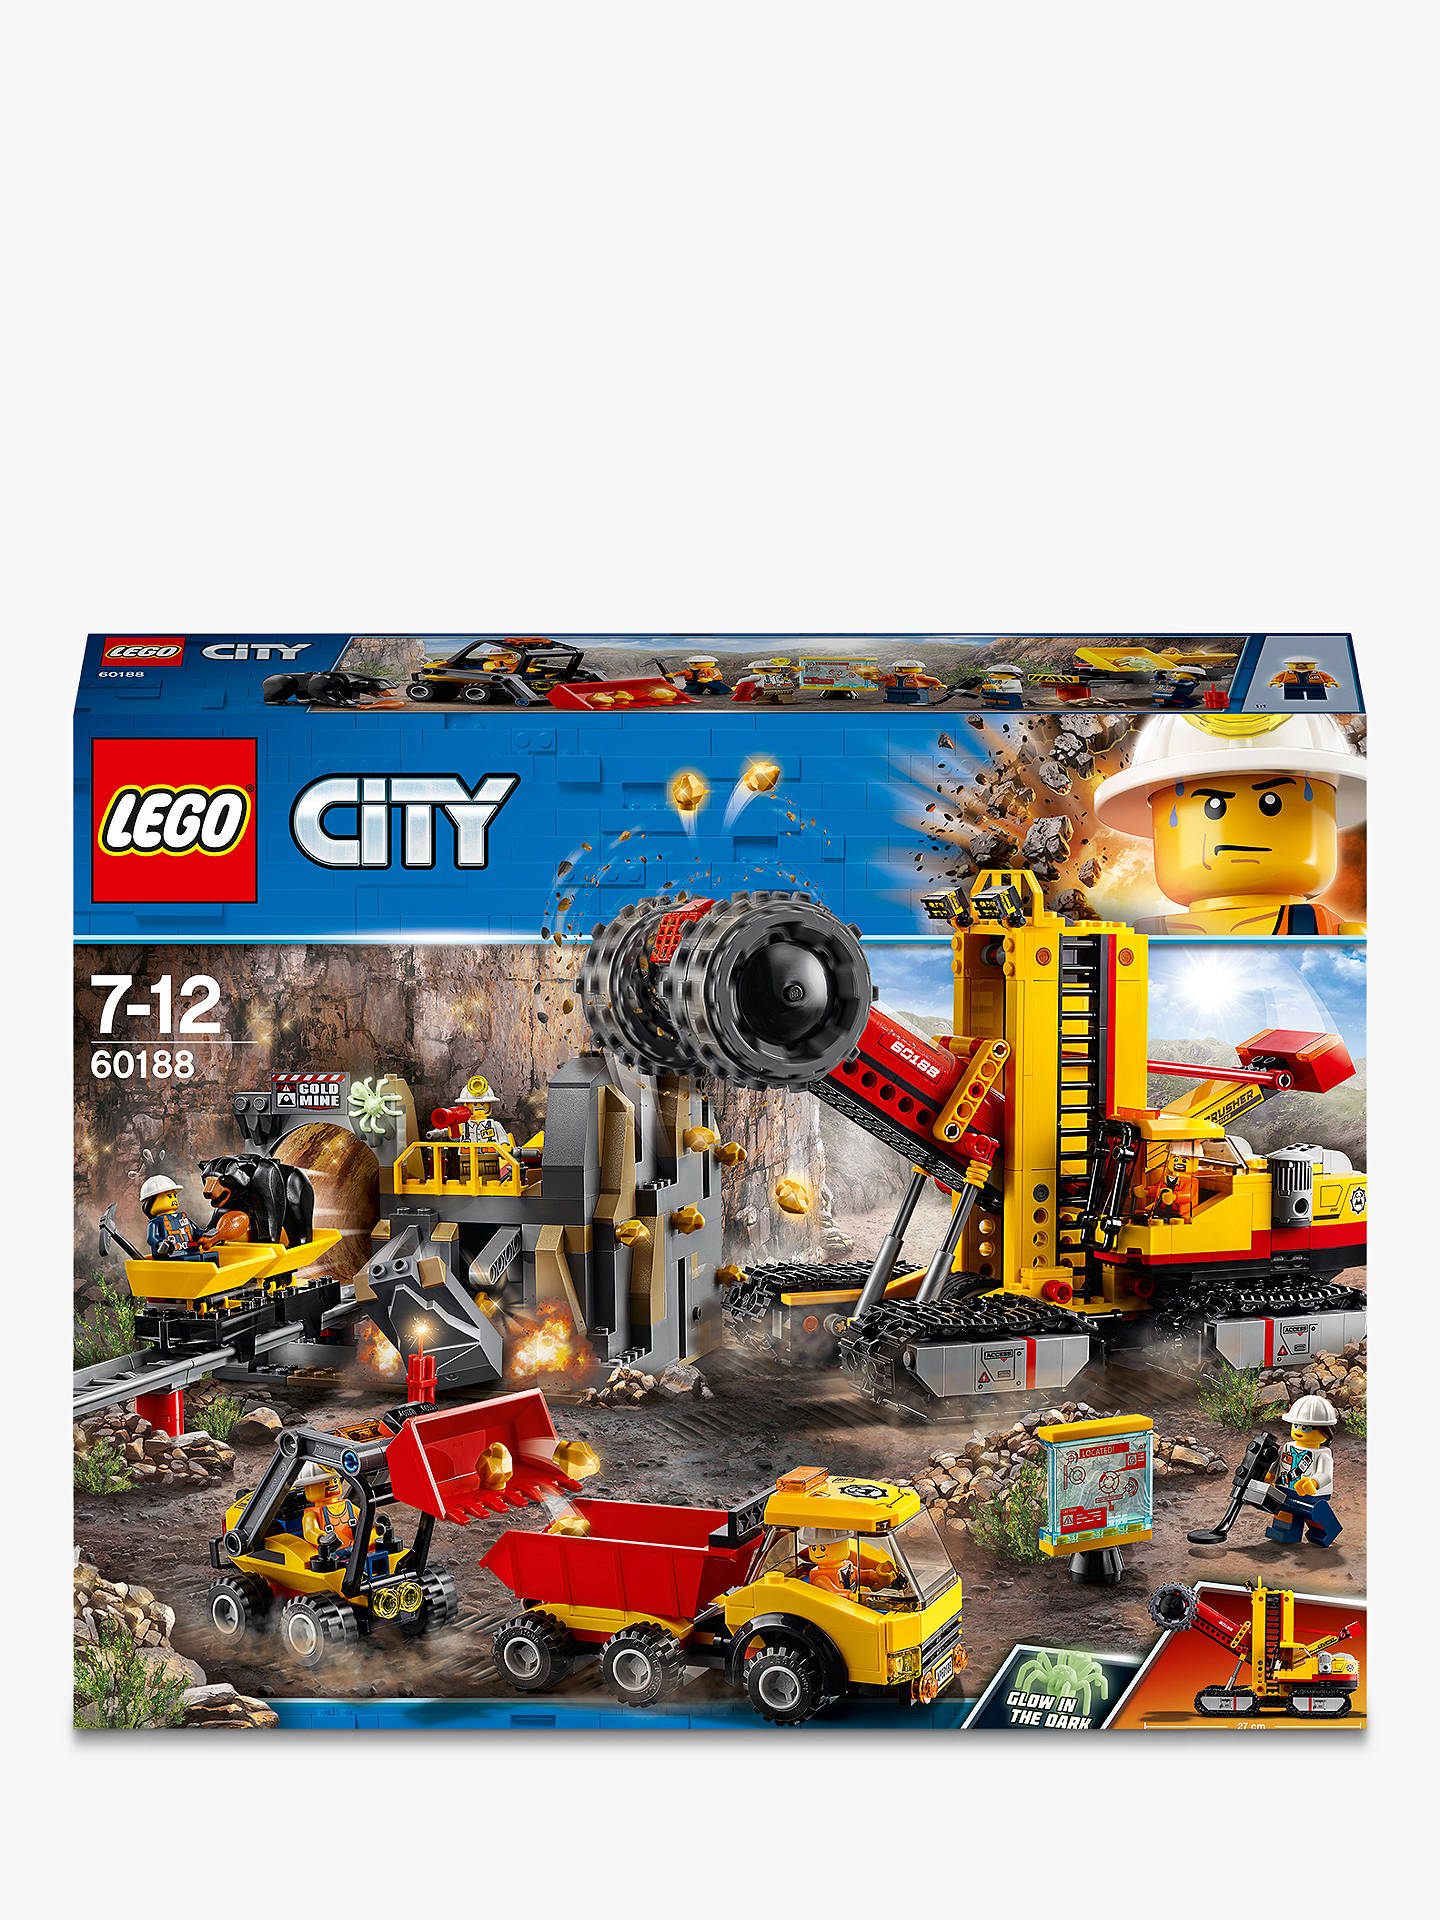 LEGO City 60188 Mining Experts Site at John Lewis & Partners